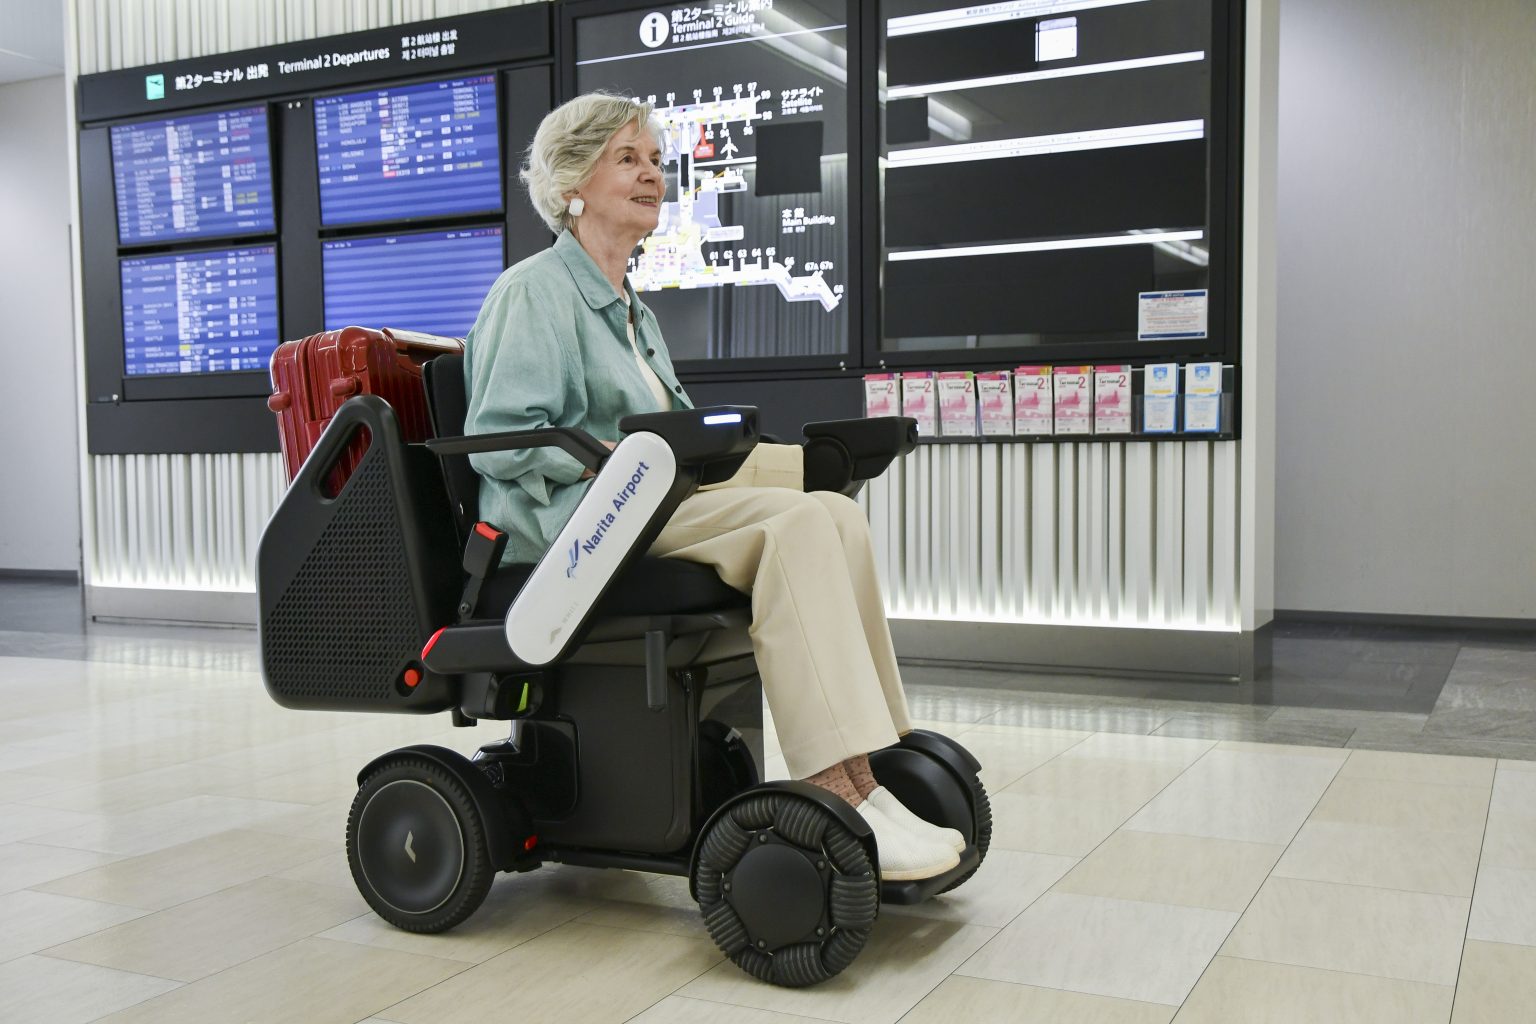 Woman rides a WHILL autonomous airport mobility device.